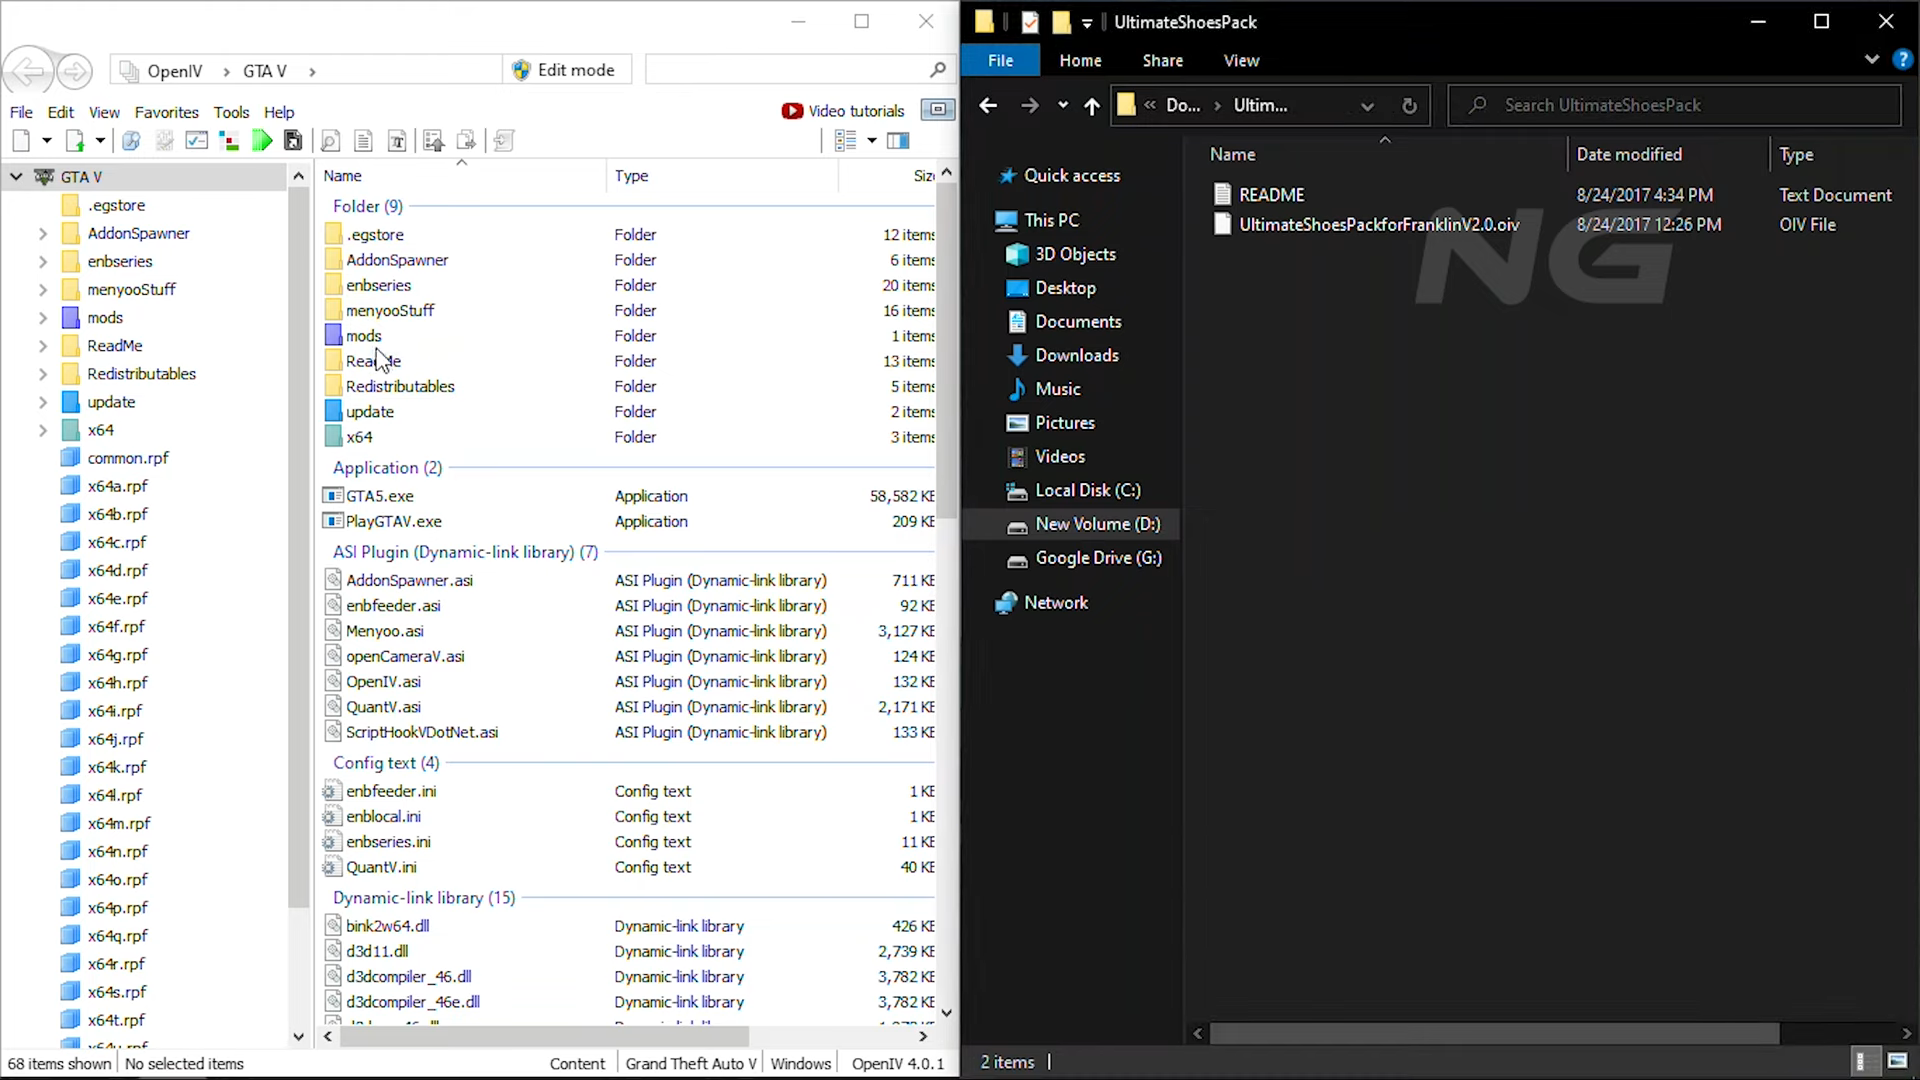 Now open the "Open IV" and downloaded file directory windows side by side for your ease.